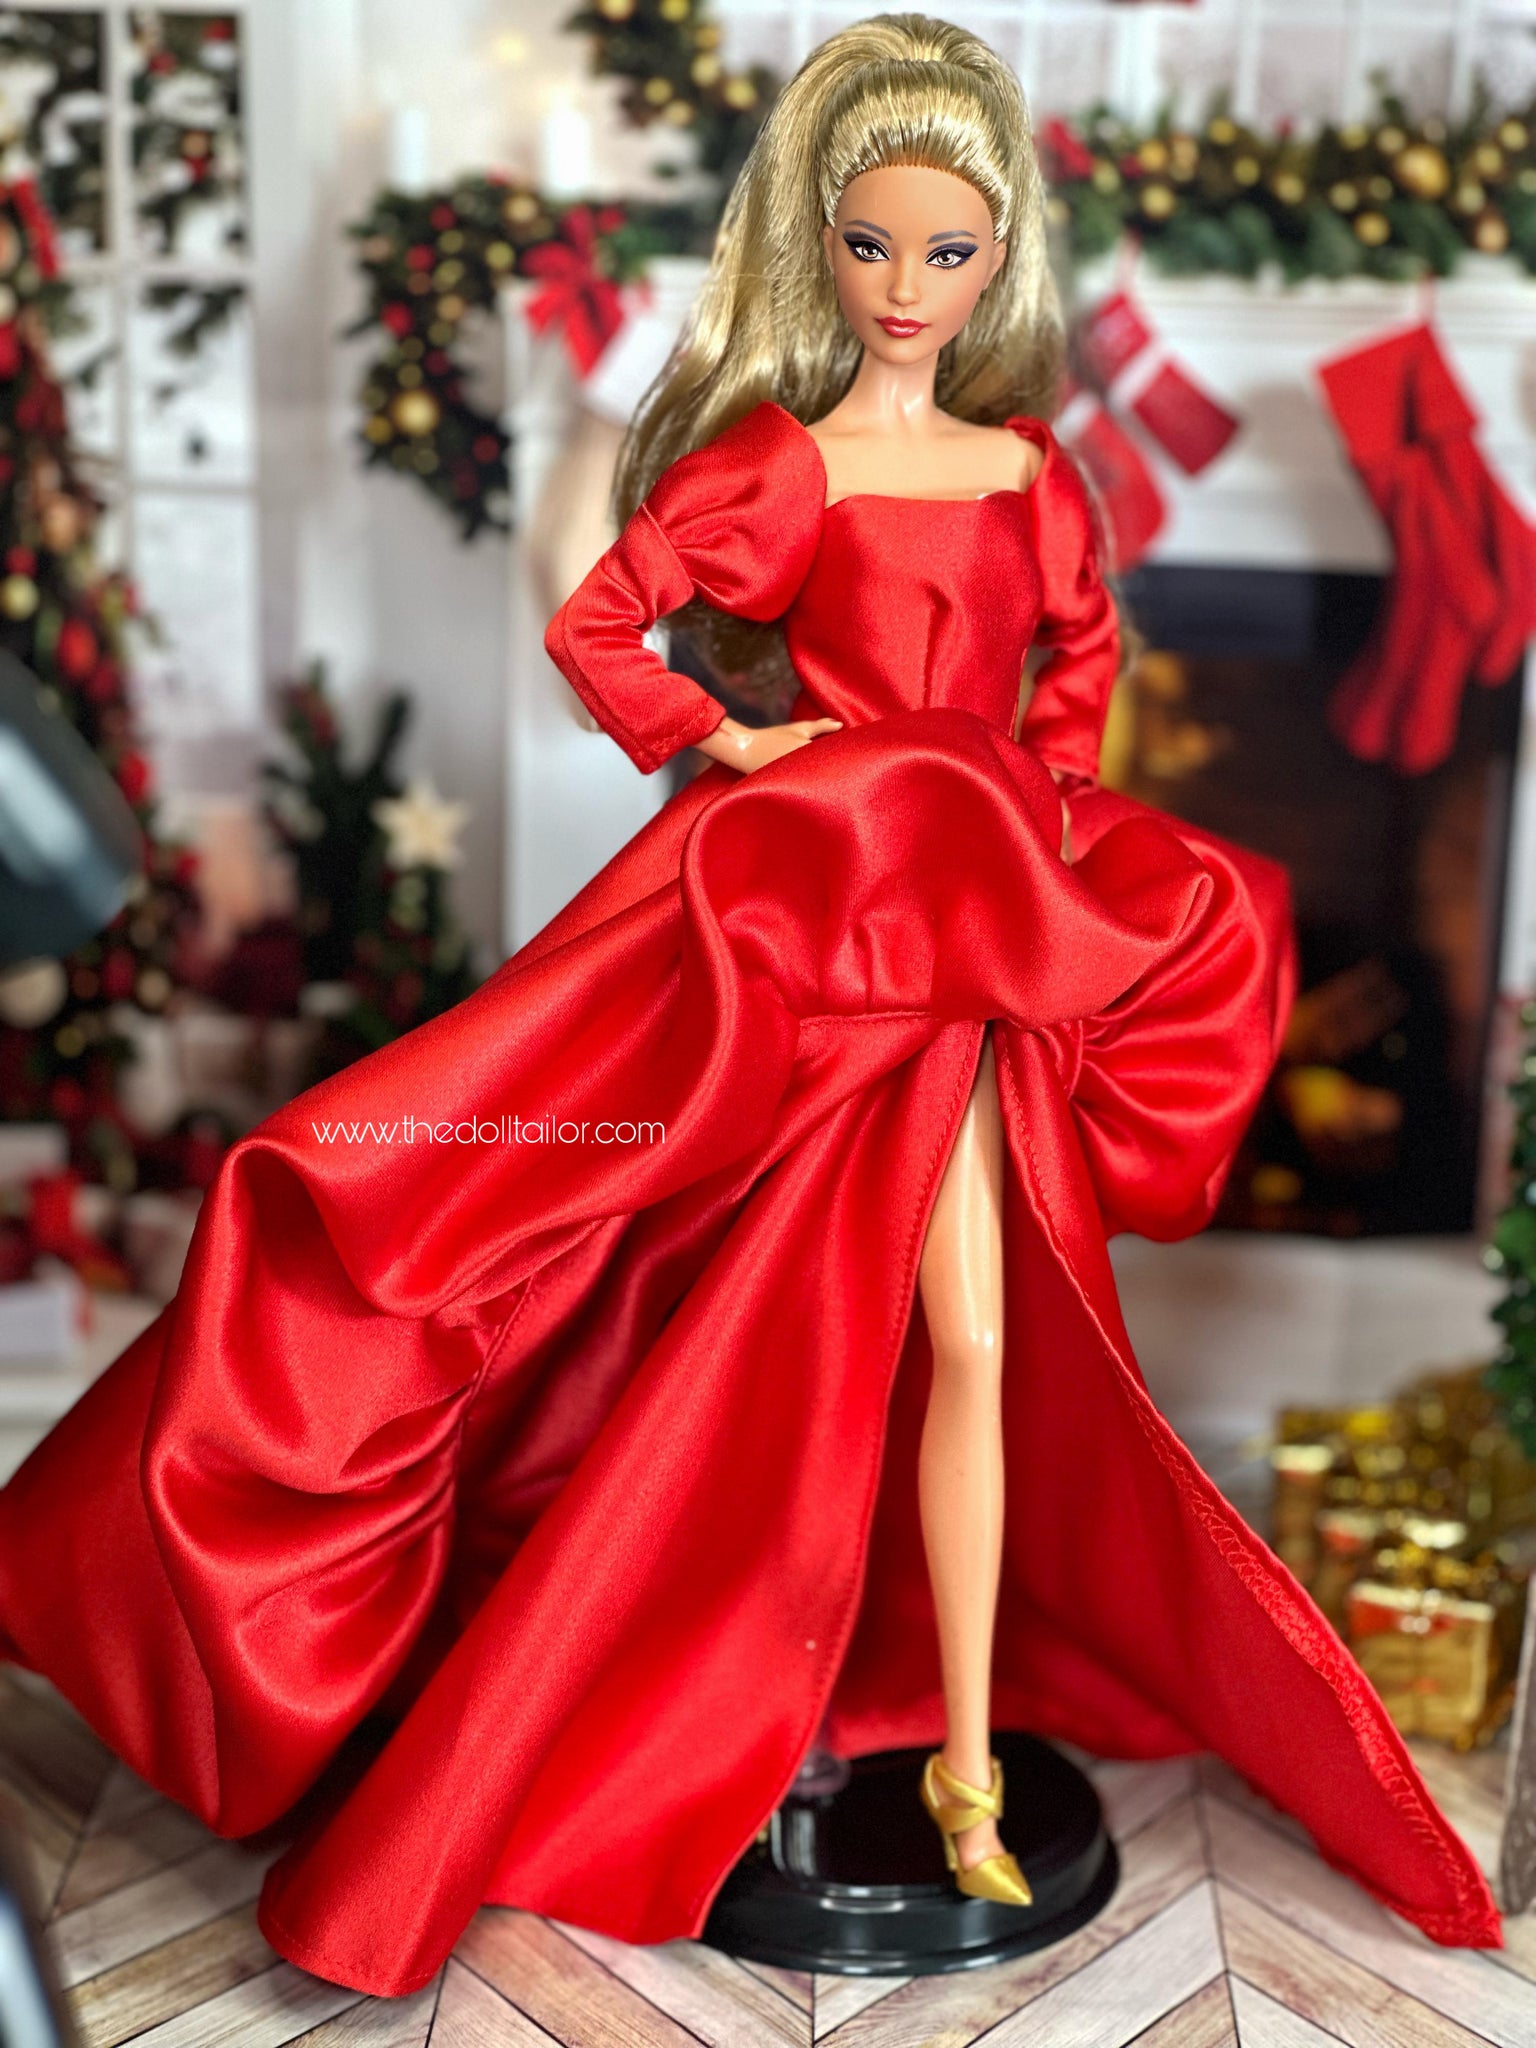 Amazon.com: 2017 Holiday Teresa Doll, Brunette with Red Dress : Toys & Games